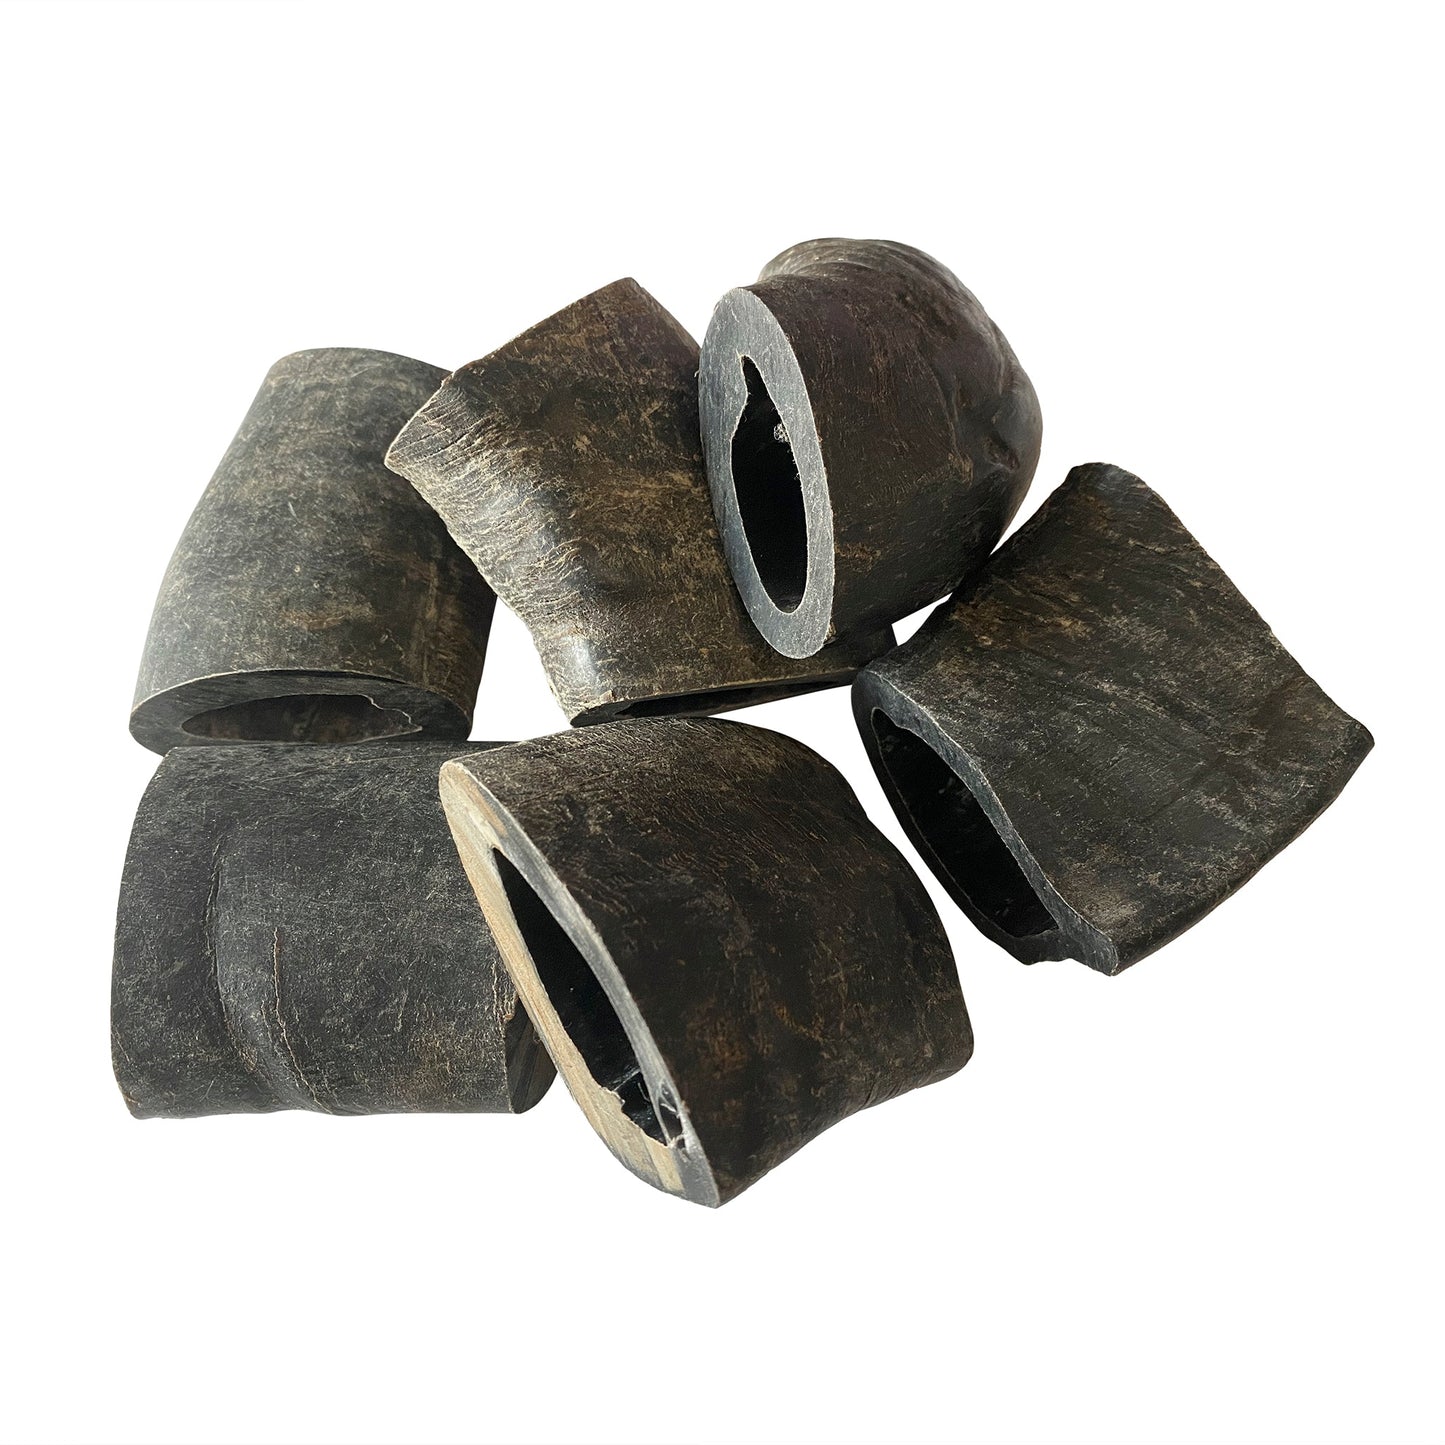 Water Buffalo Horn Section/Tuffie Dog Chews-4 Count-20 oz